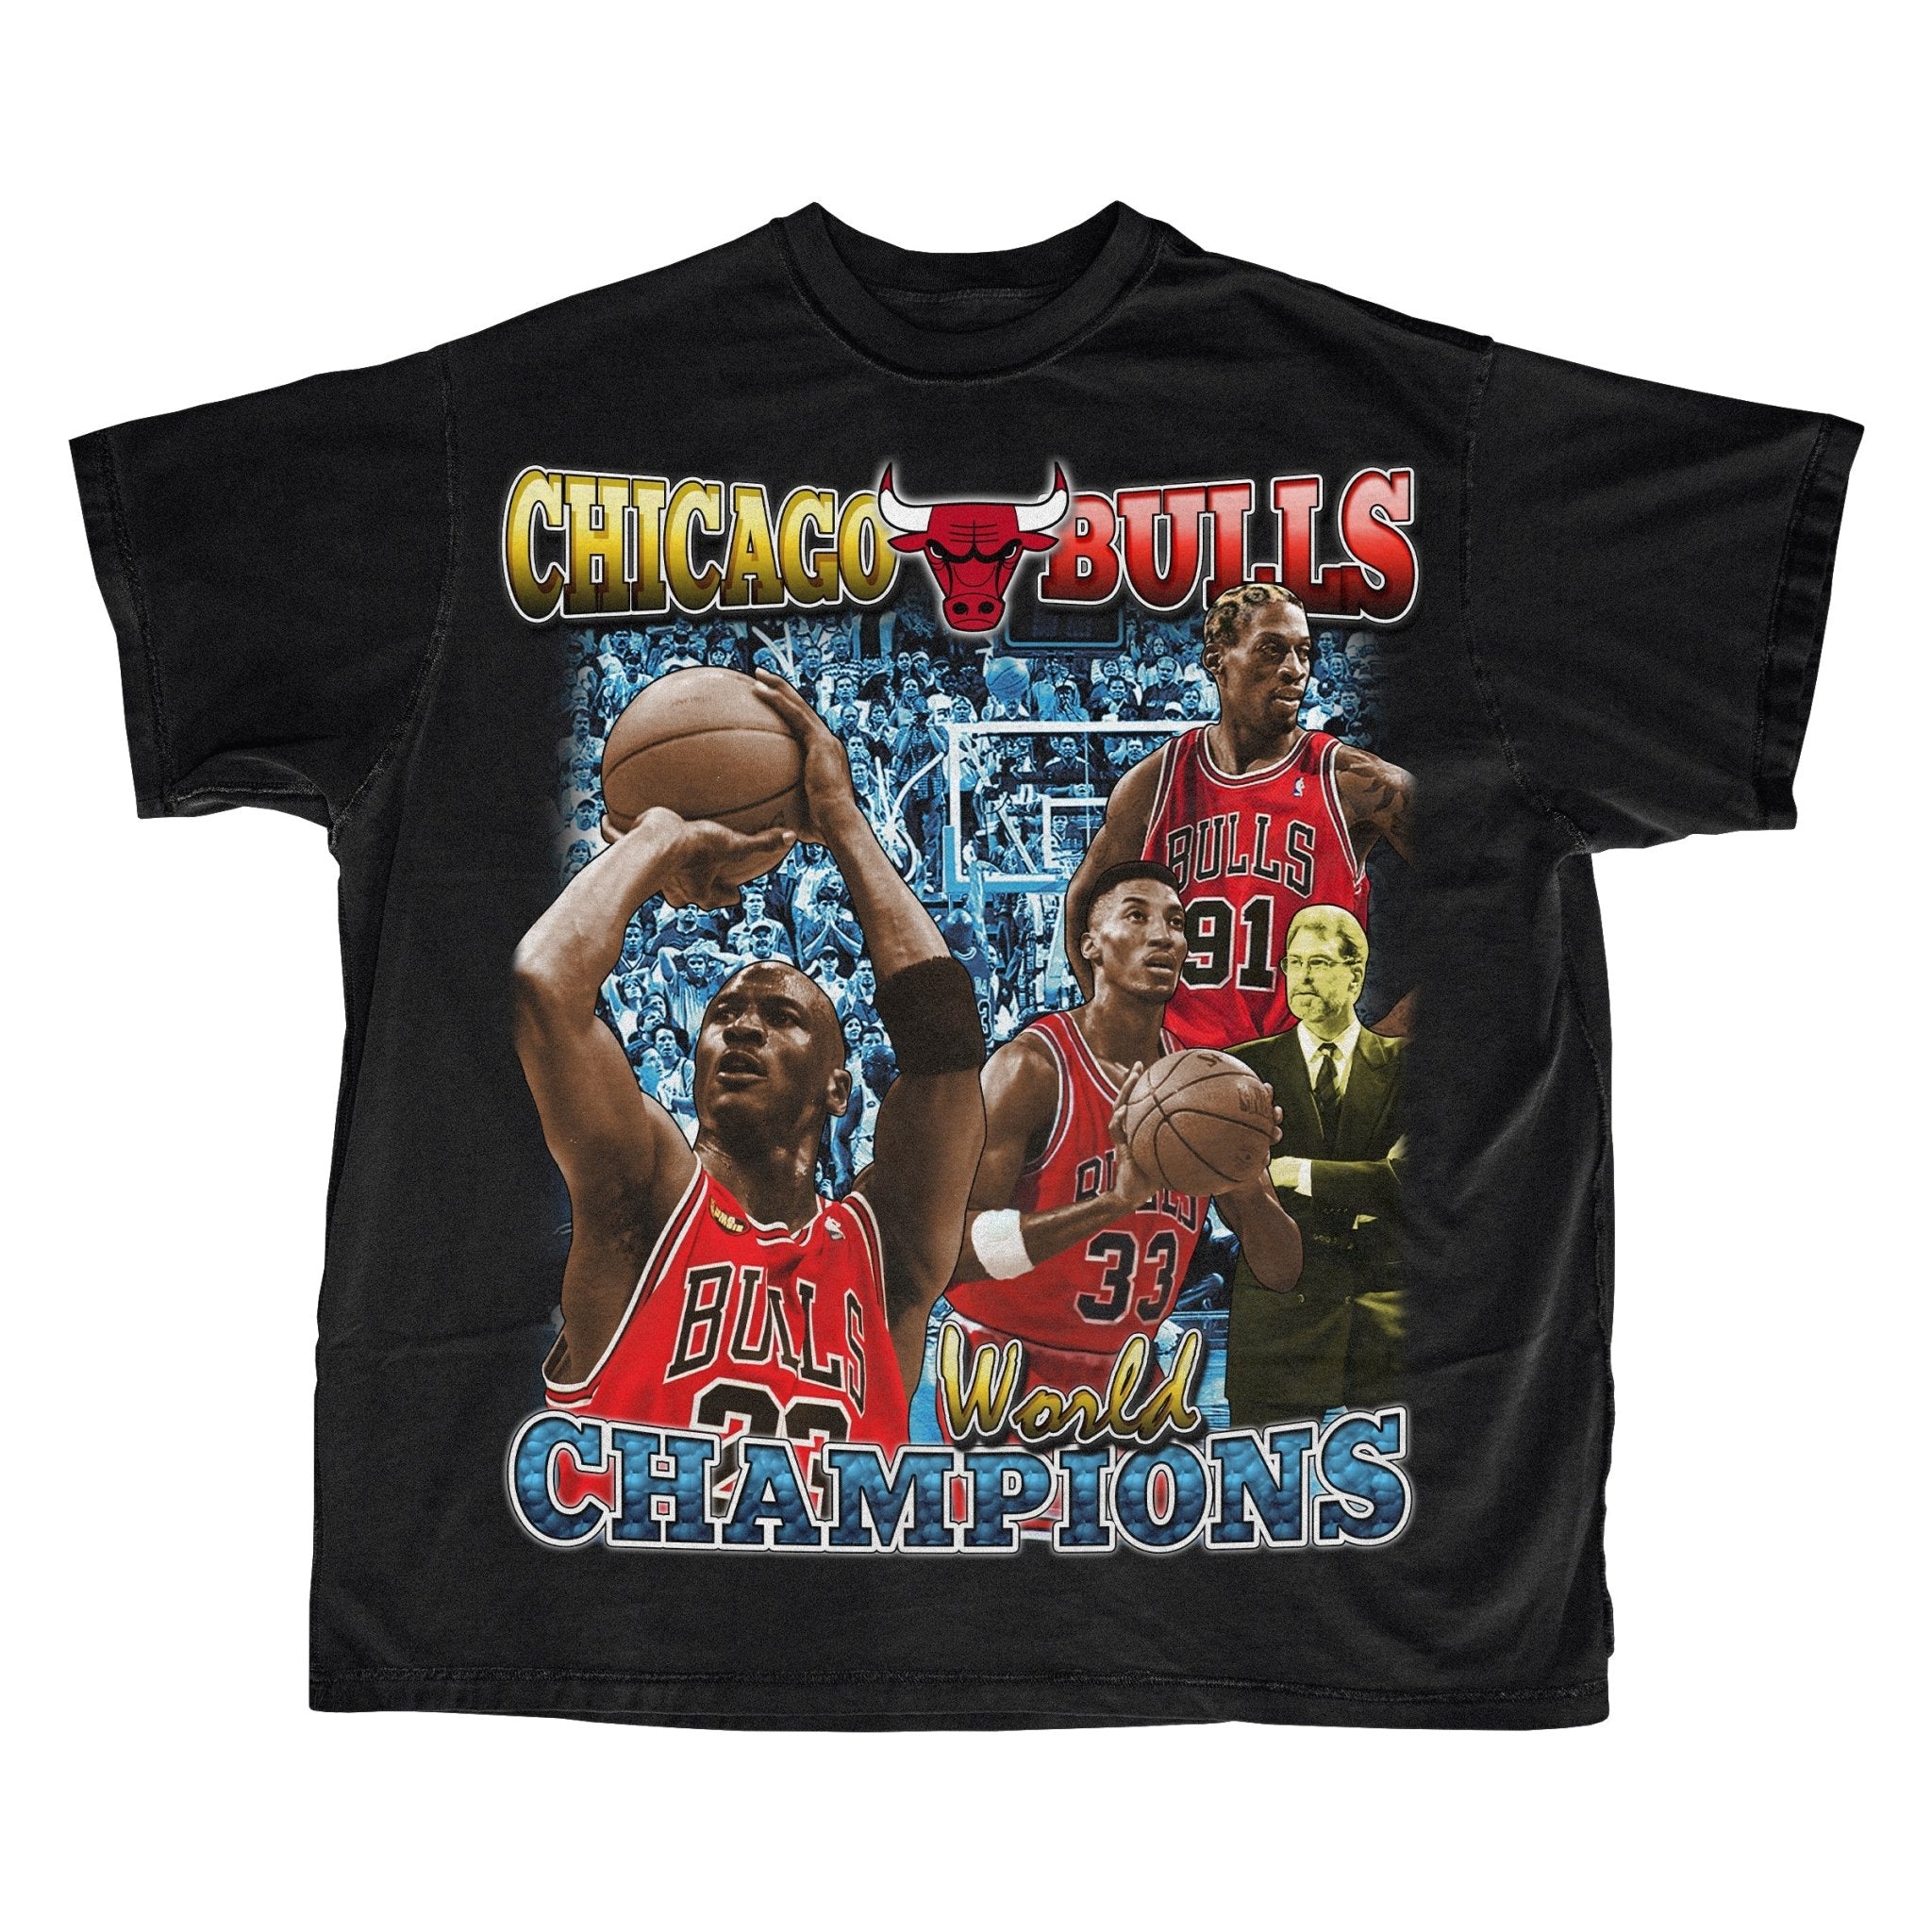 Find the best offers and products on Chicago Bulls Graphic Tee